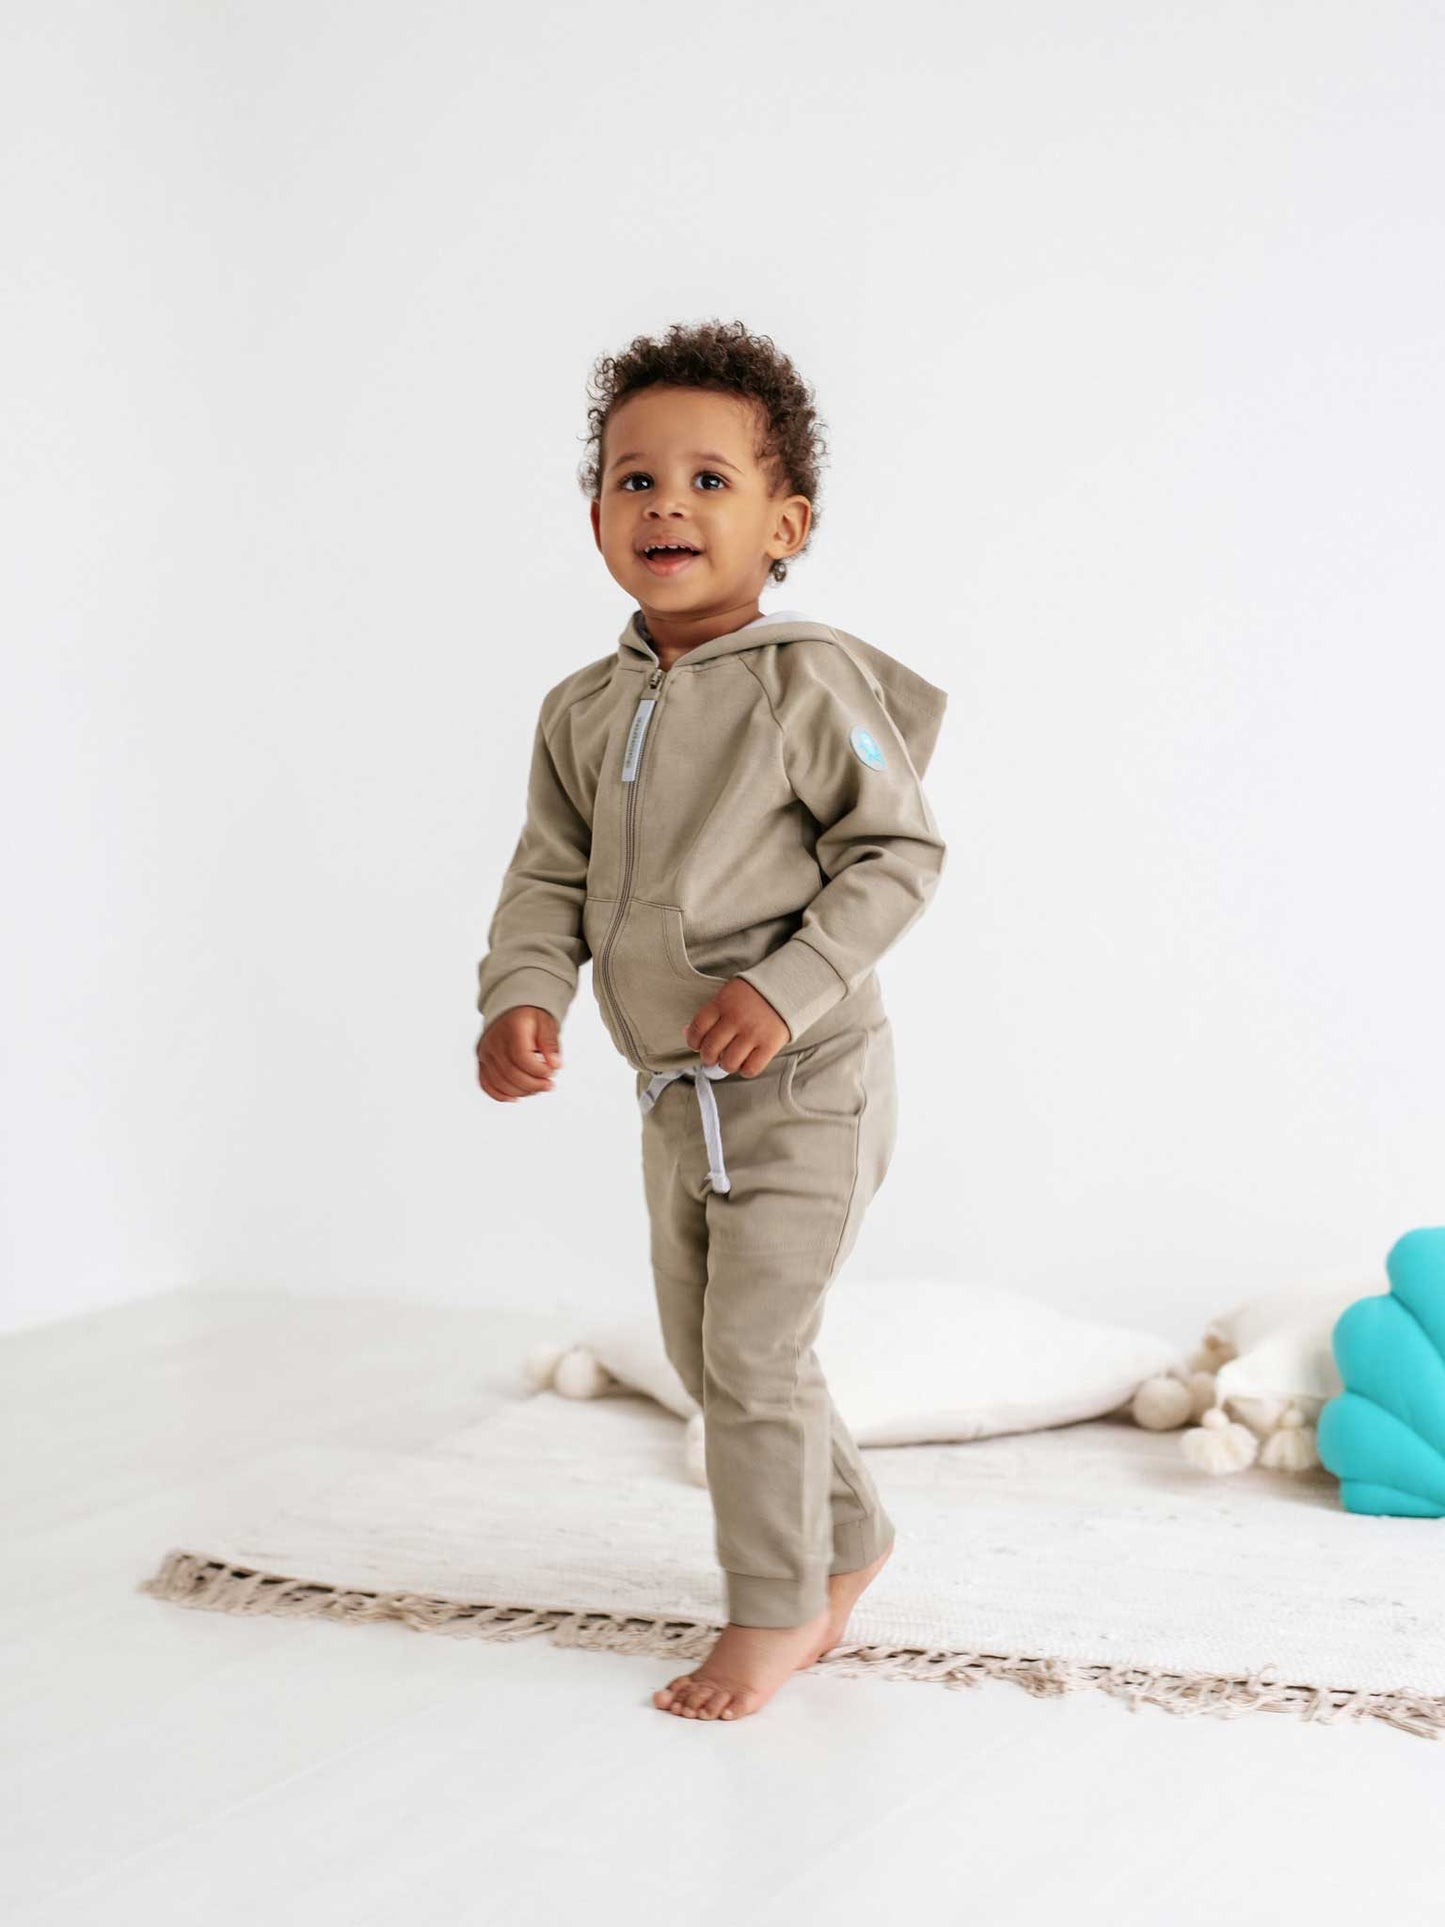 Infant Pants Sea Friends 335 provides cozy and stylish trousers designed with comfort in mind. Made out of 100% cotton, the soft material keeps your child away from any skin irritations. With adjustable straps, it is easy to secure the perfect fit as your youngster grows.